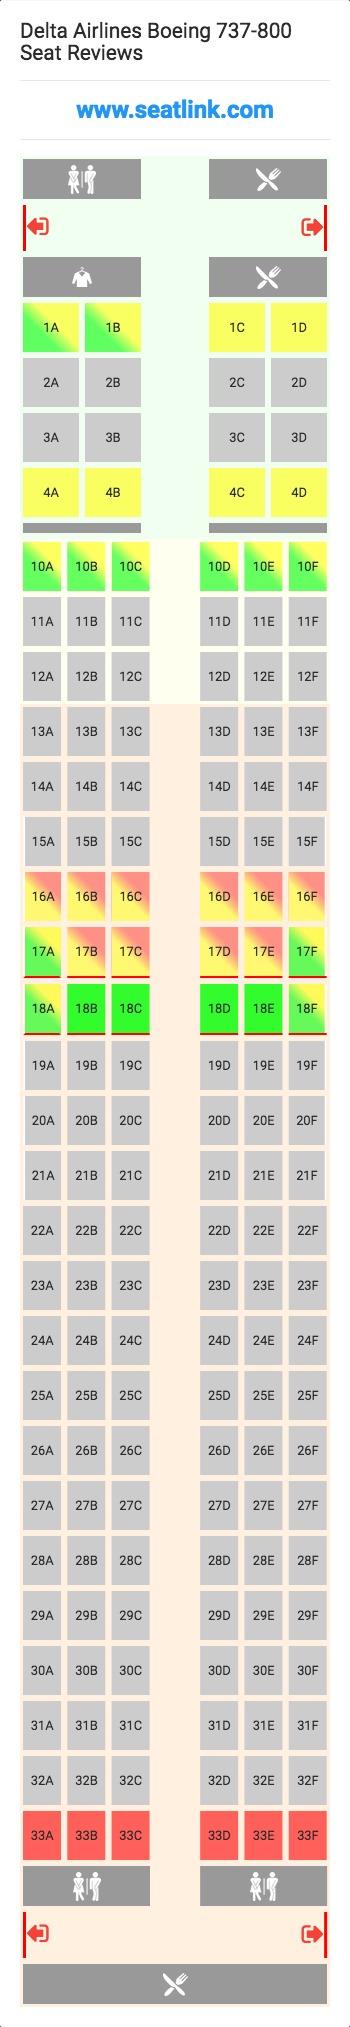 Delta Airlines Seating Chart 737